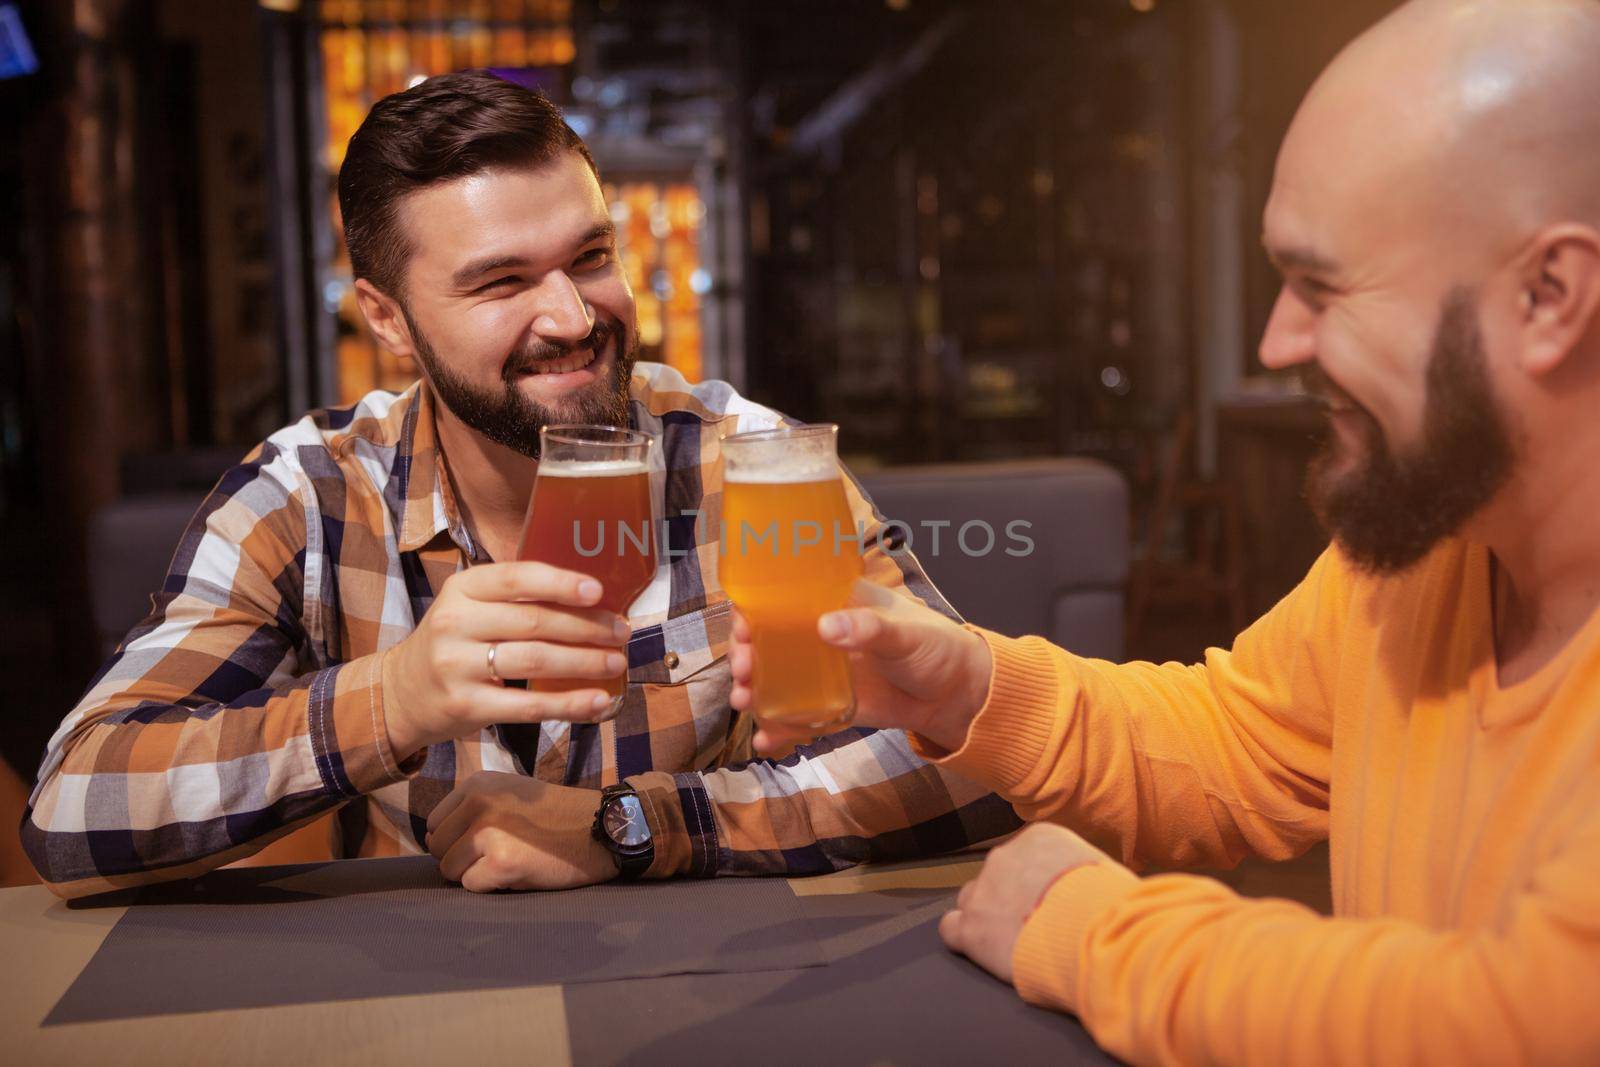 Cheerful male friends clinking their beer glasses, celebrating at the pub